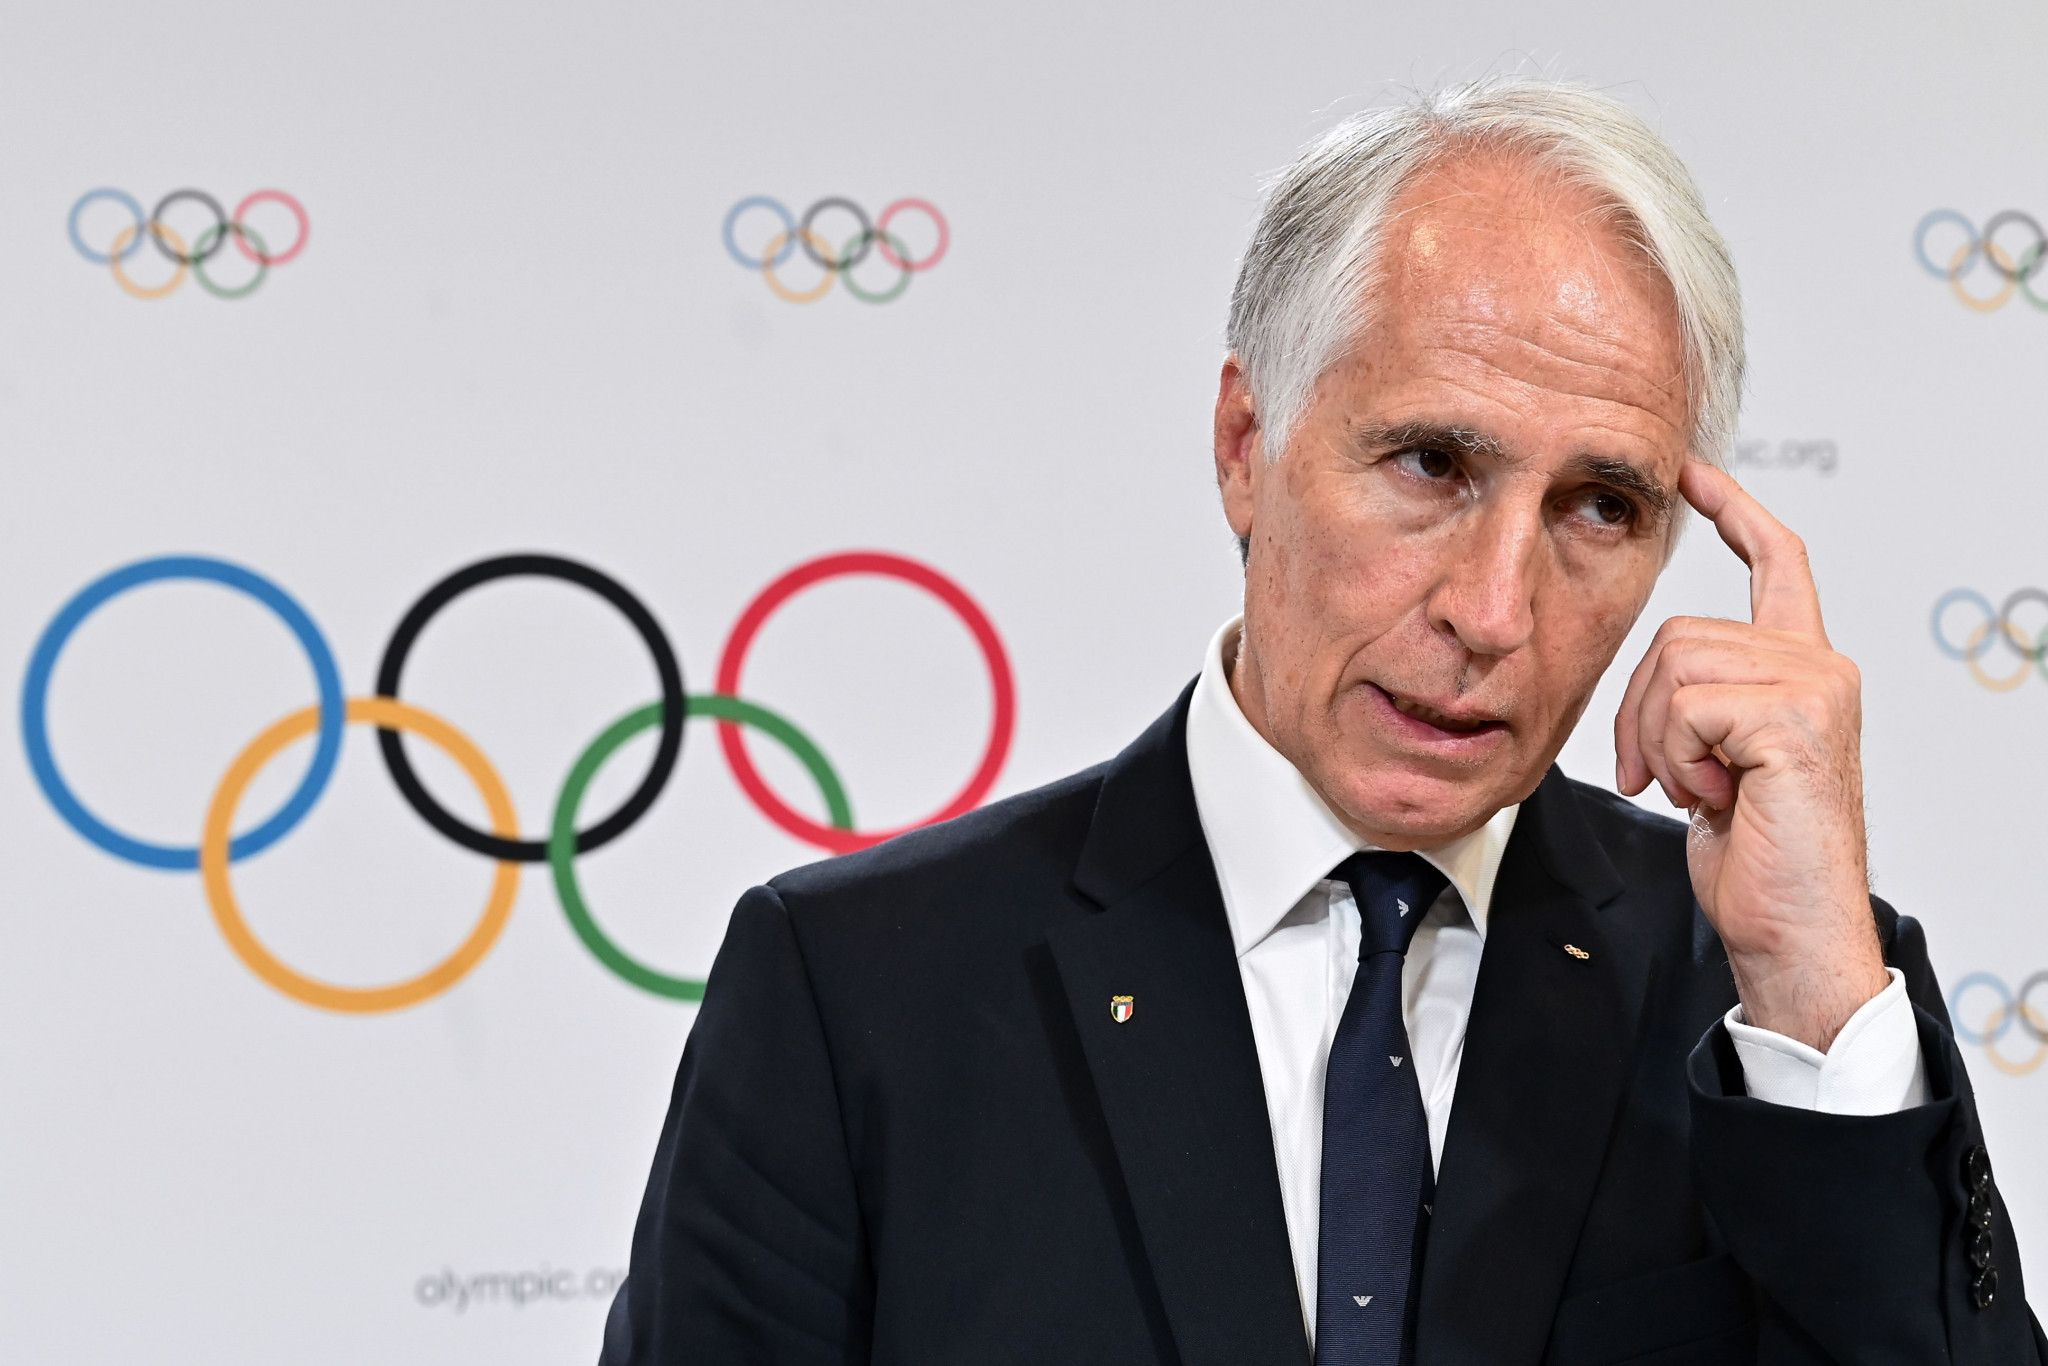 The hard work starts now for Giovanni Malagò, who having led the successful bid will now be President of the Milan Cortina 2026 Organising Committee ©Getty Images